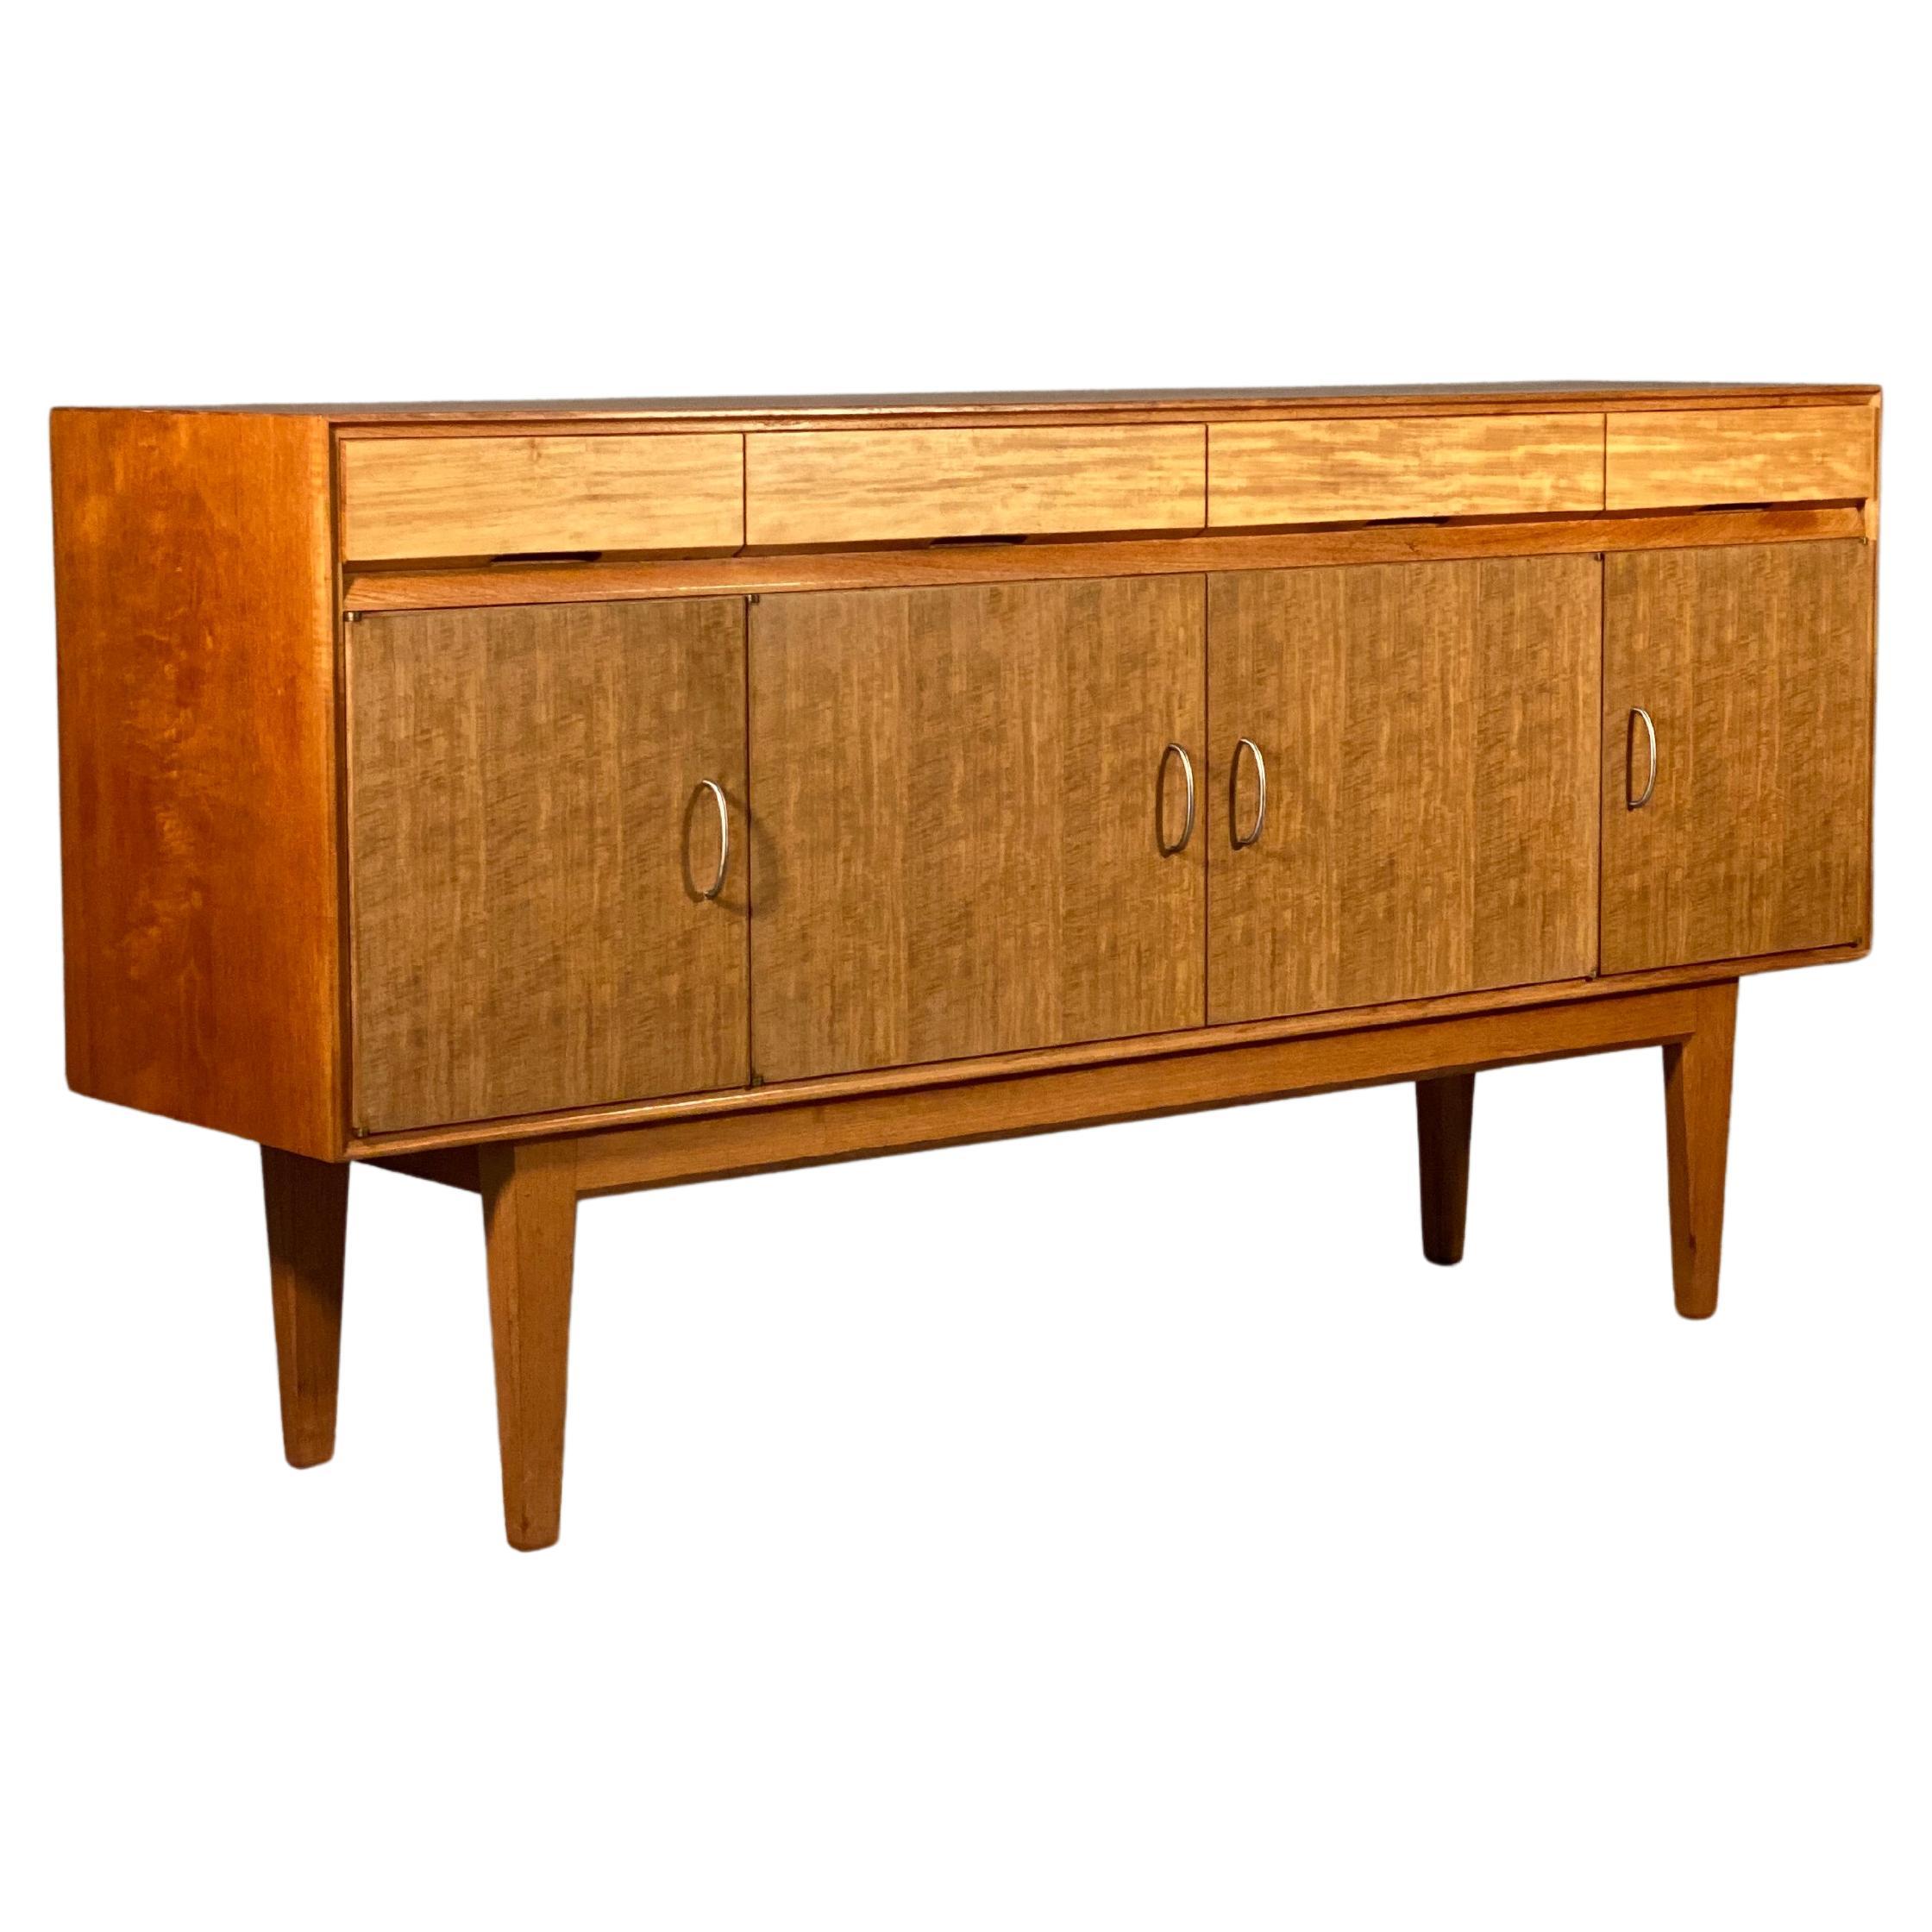 Rare Gordon Russell Sideboard By WH Curly Russell c.1958